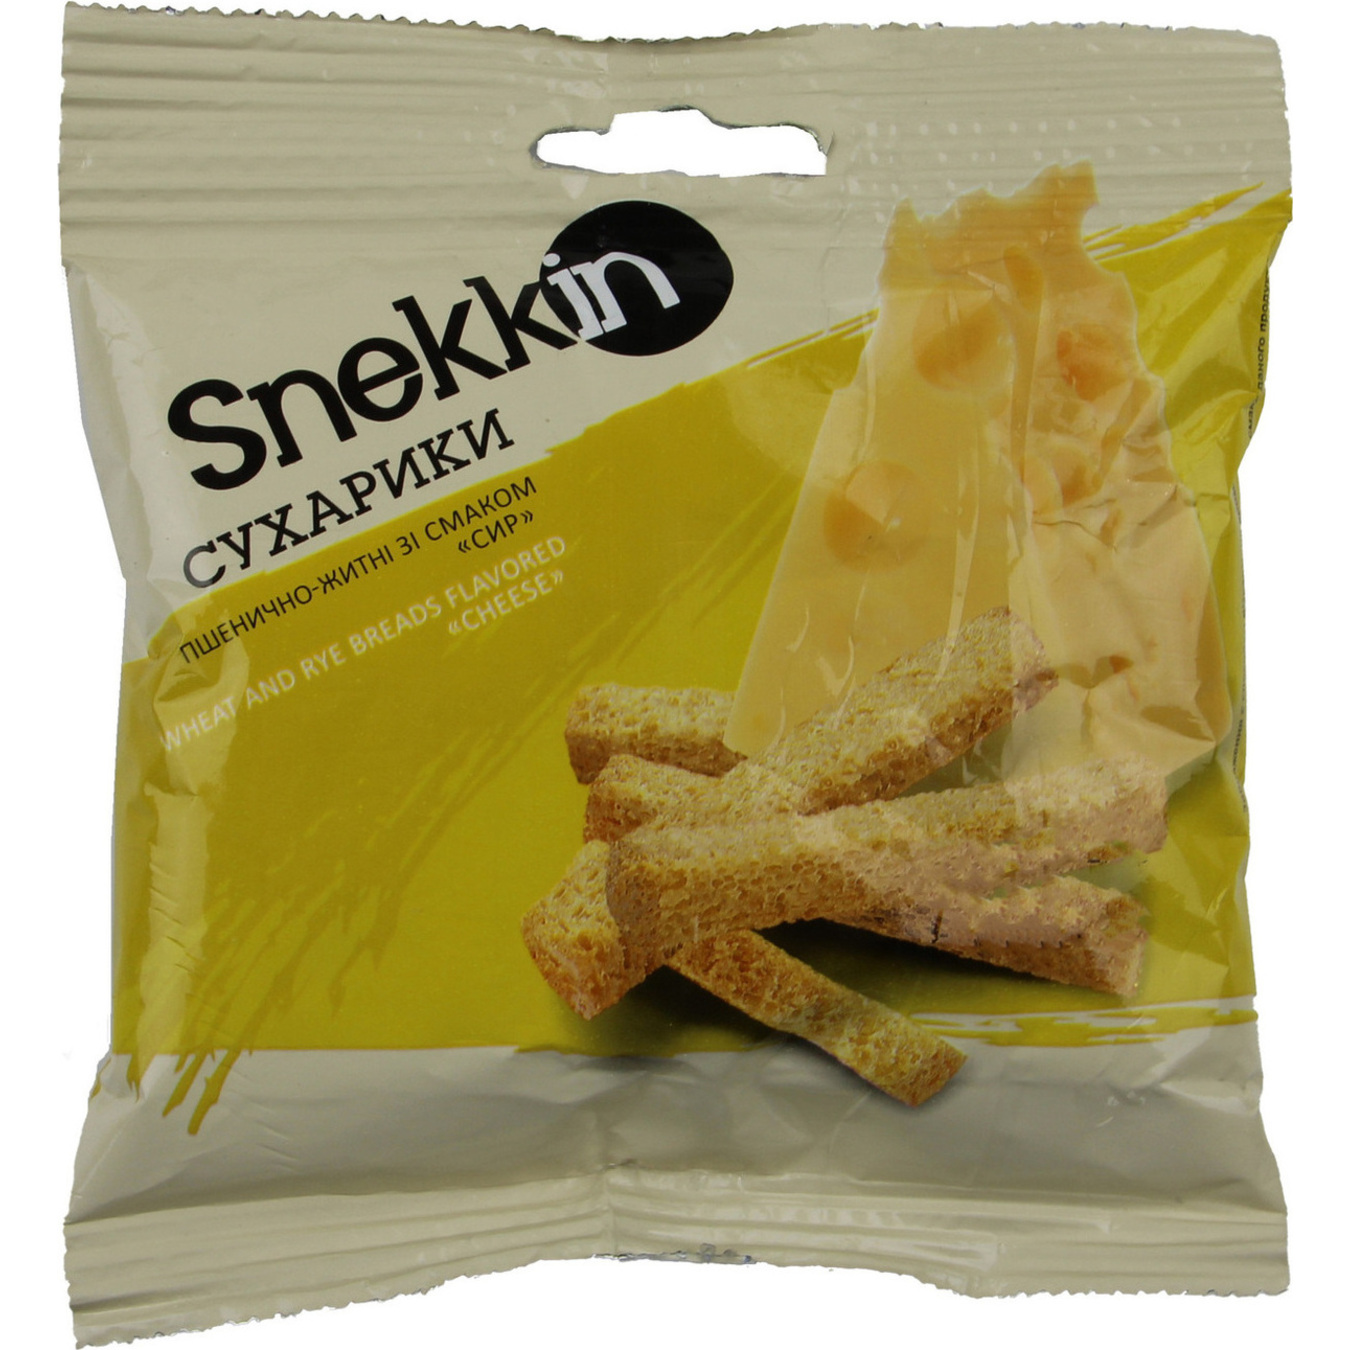 Snekkin wheat-rye crackers with a taste of cheese 35 g